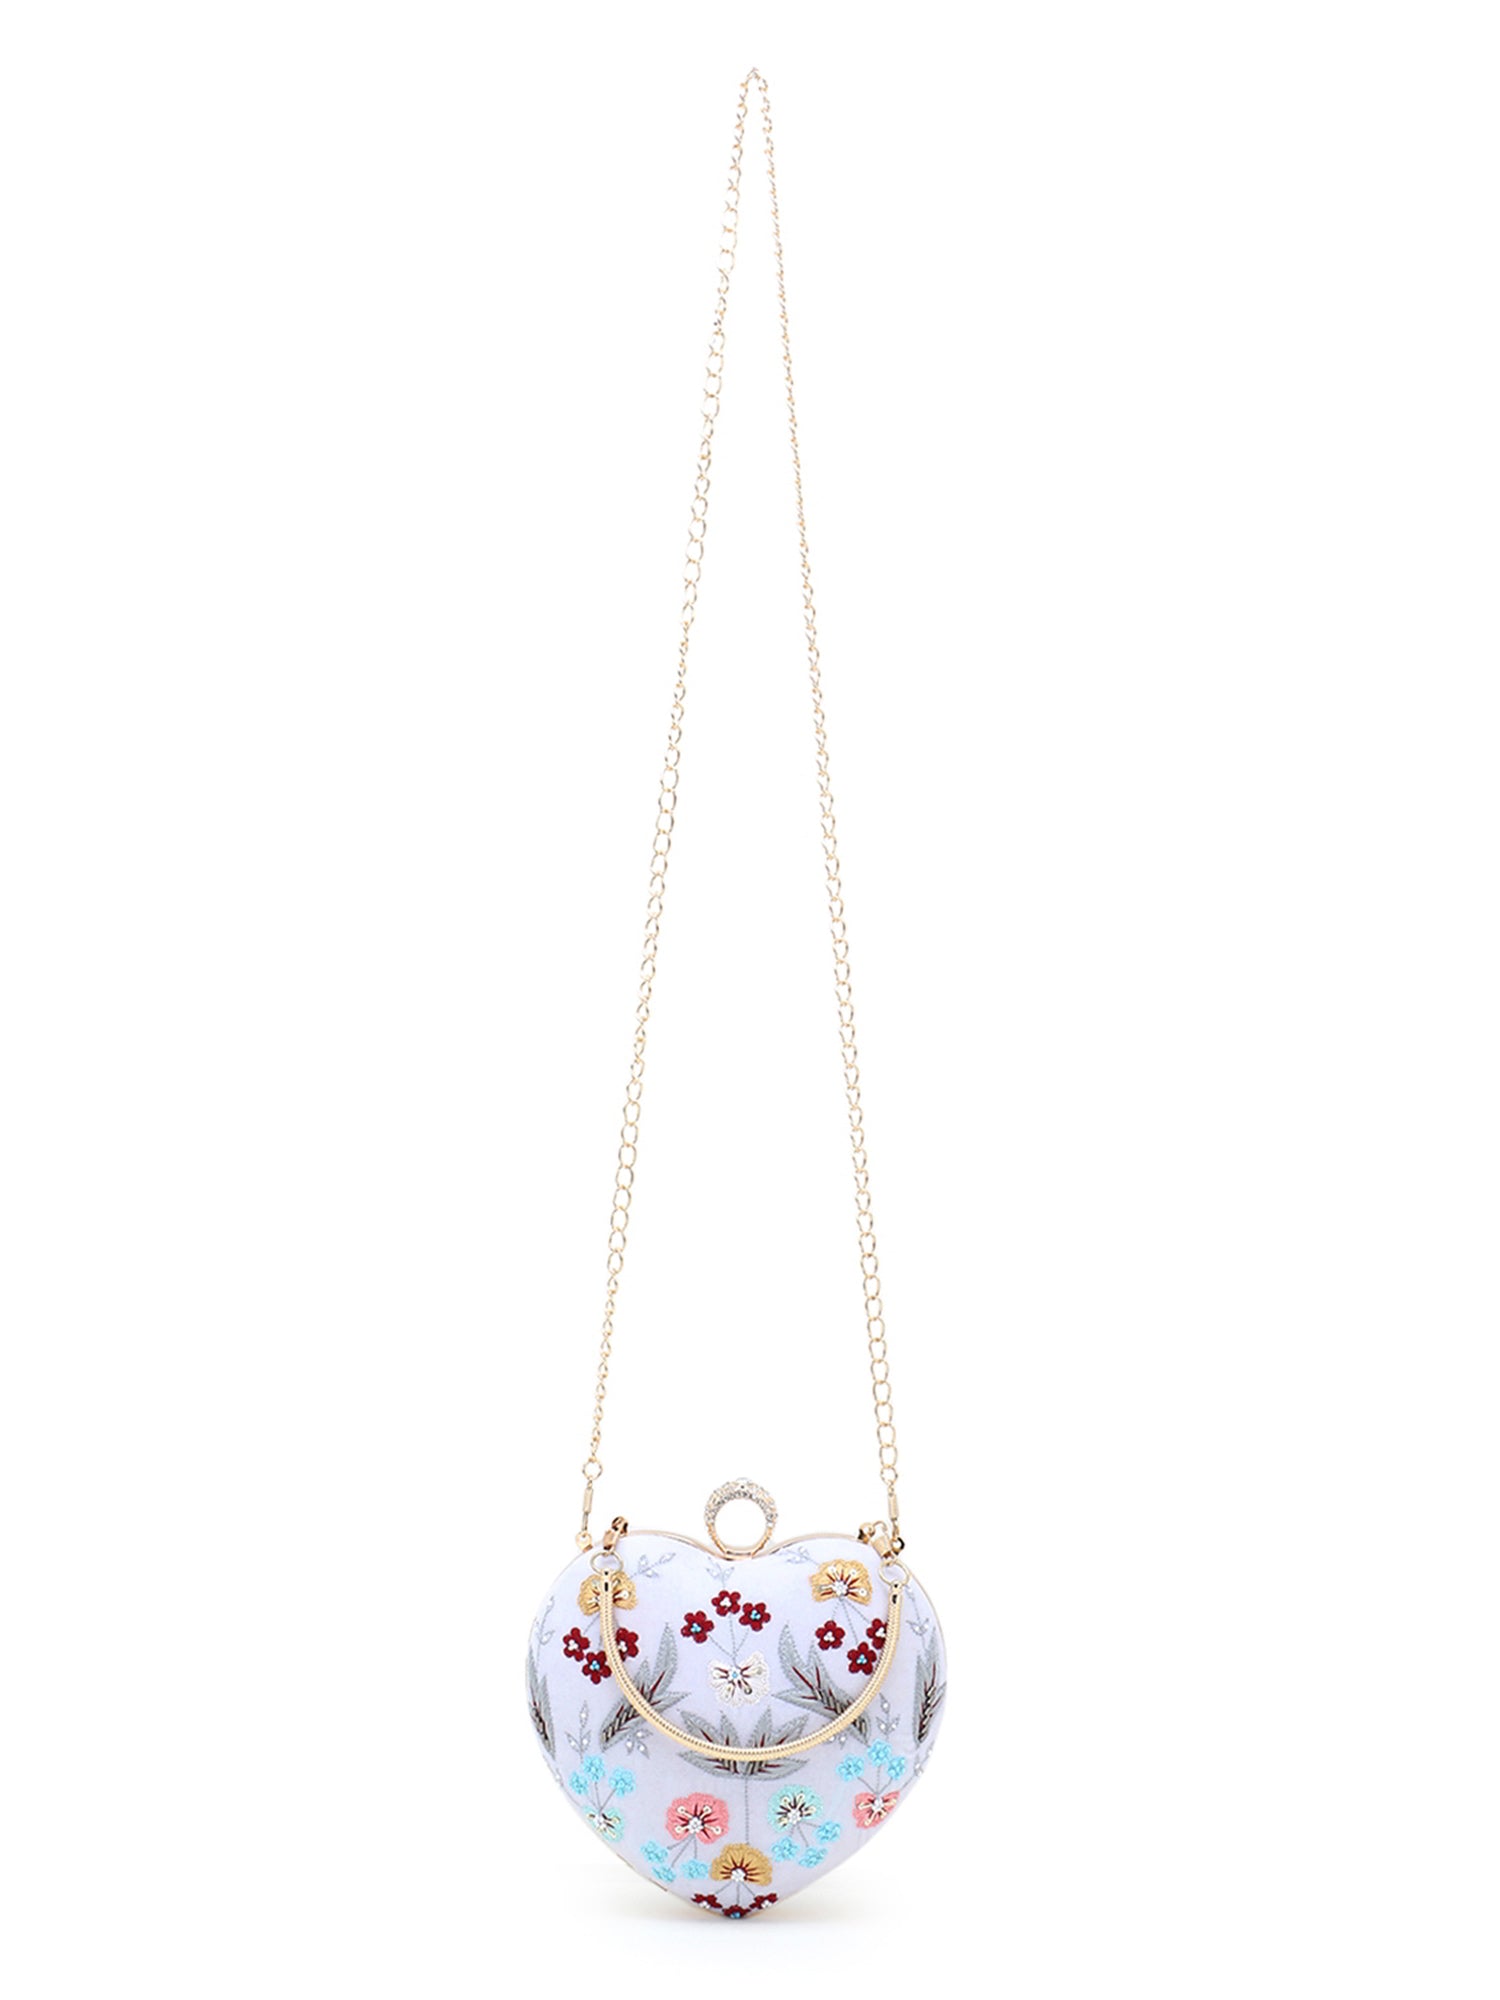 Love Velvet Floral Embroidered Heart shaped Clutch